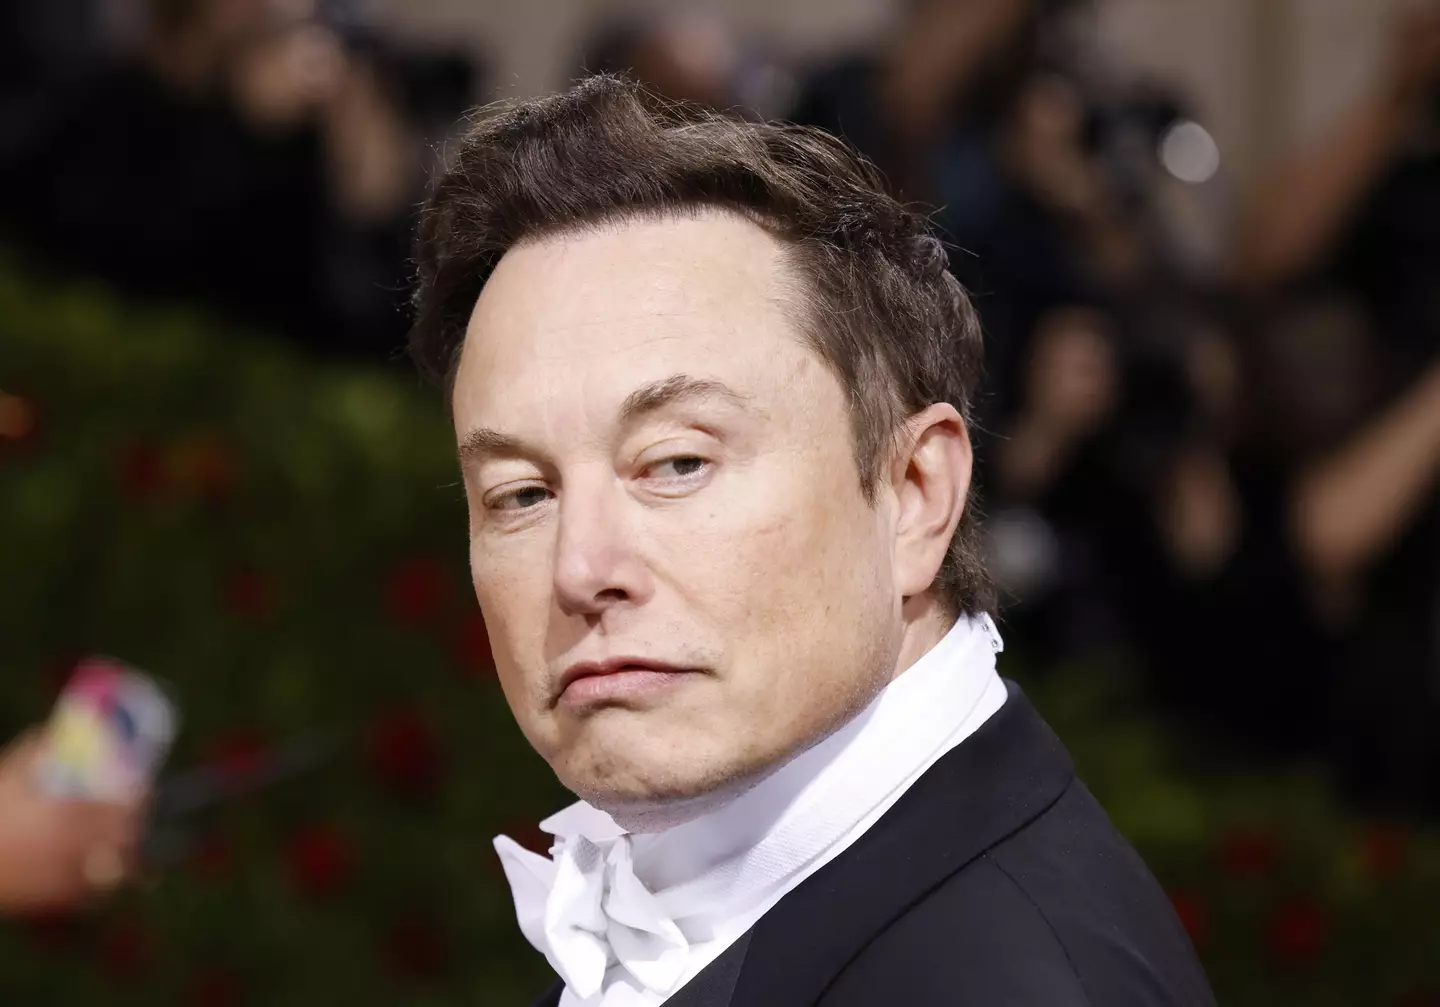 Elon Musk was found to have broken federal law.